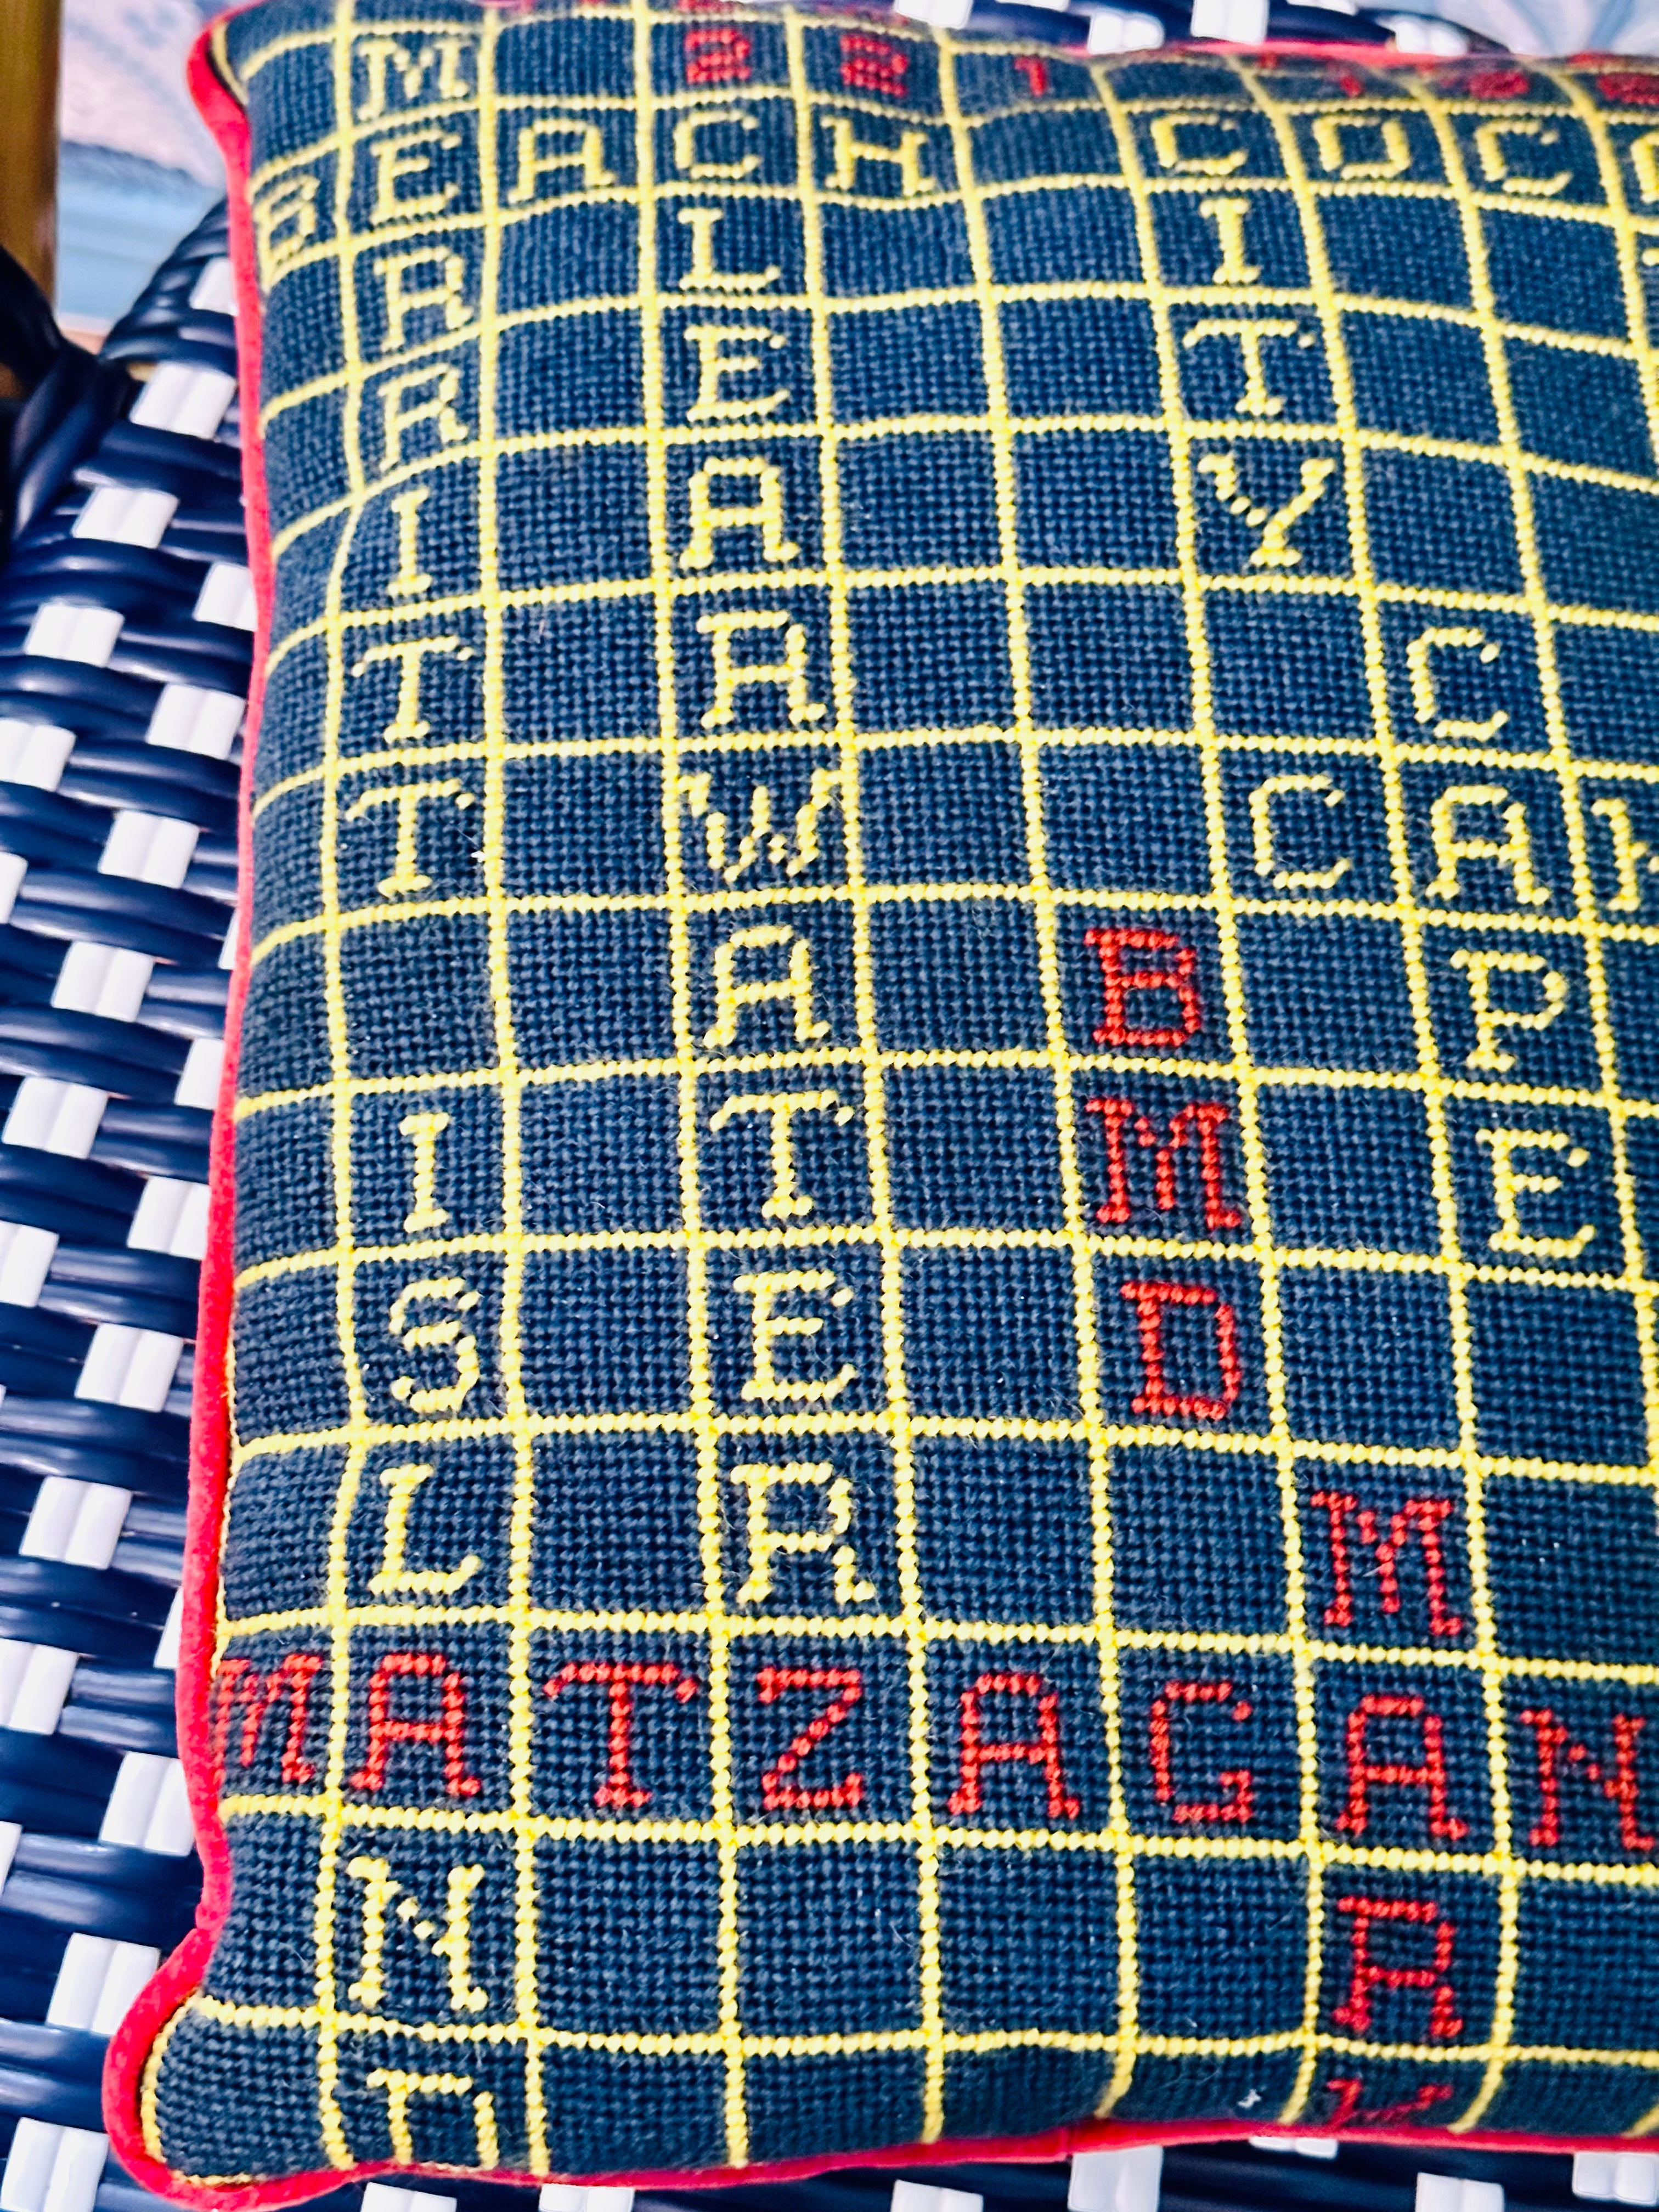 Amazingly Unique Needlepoint Featuring Southern Cities